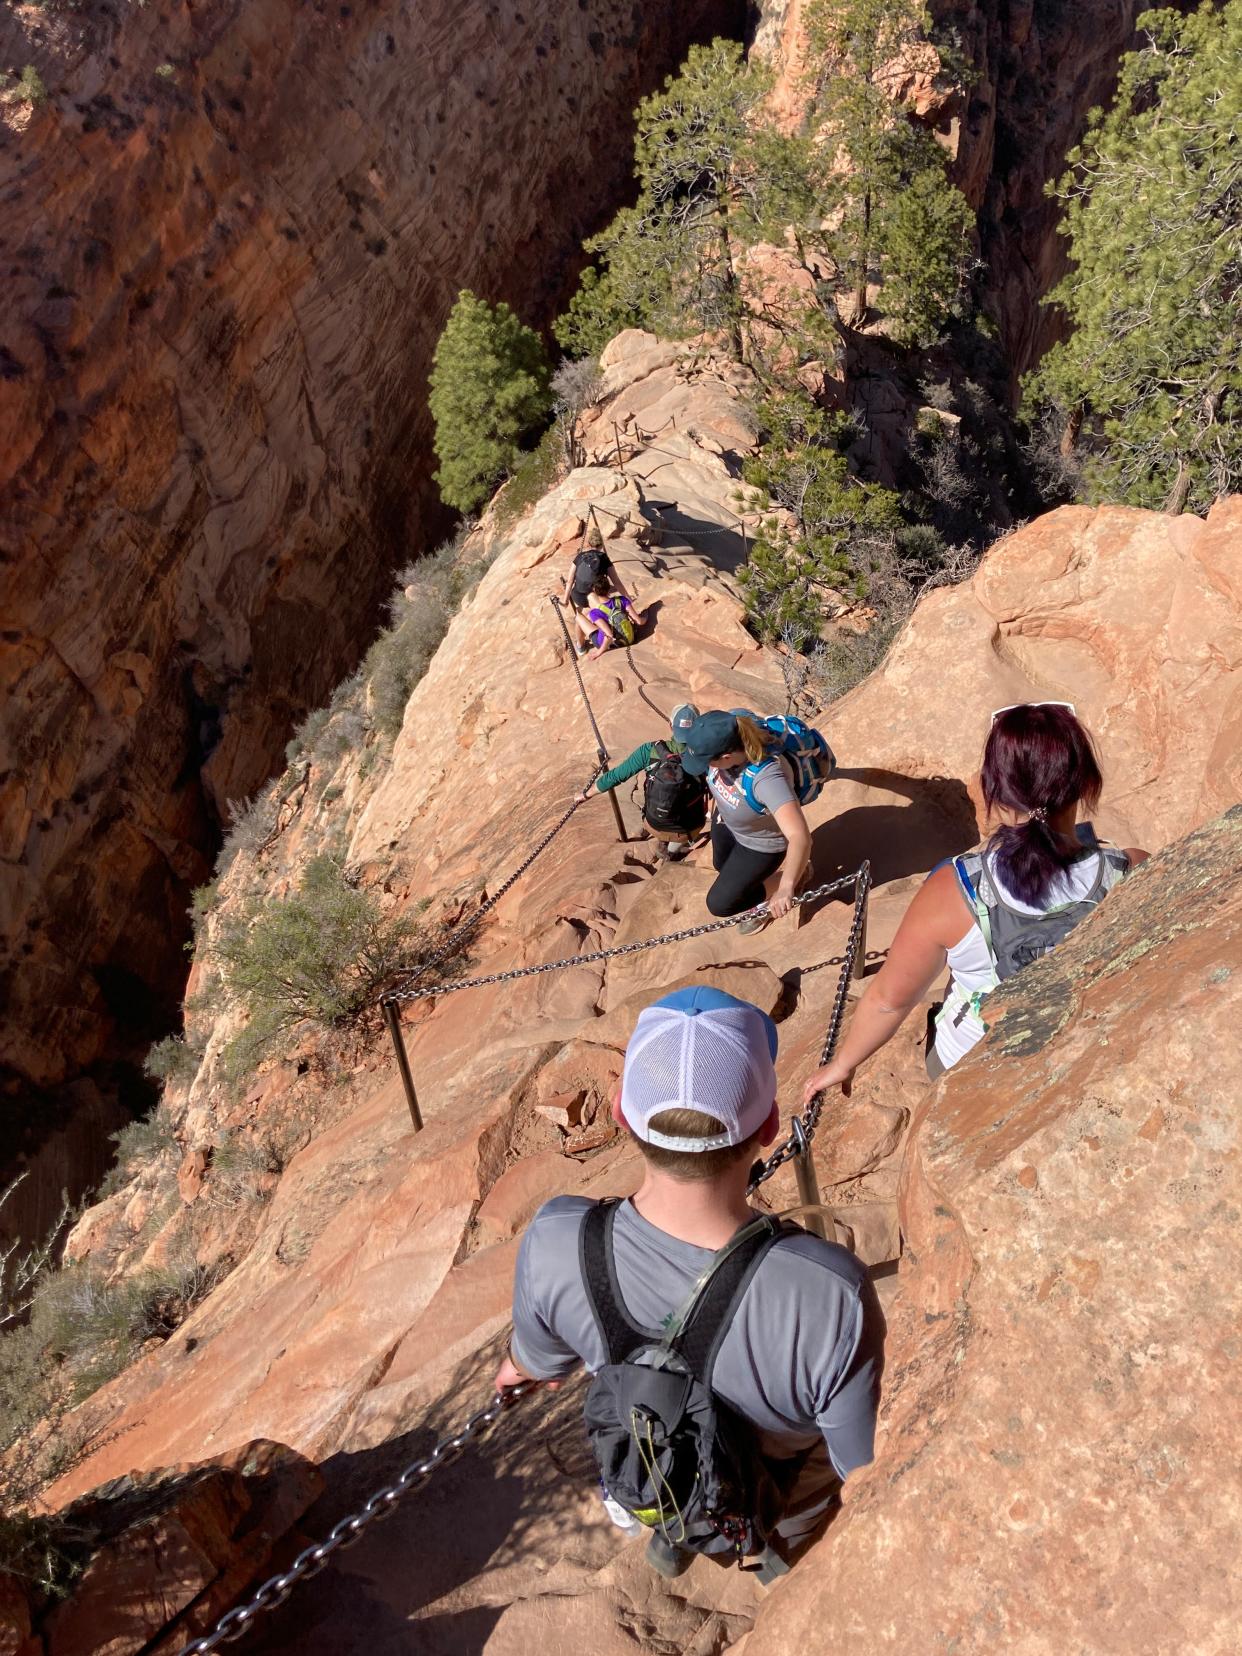 Hikers face a steep climb on the Angels Landing trail in Zion National Park on April 1, 2022. Metal chains built into the red rock help guide their way and get them down safely.